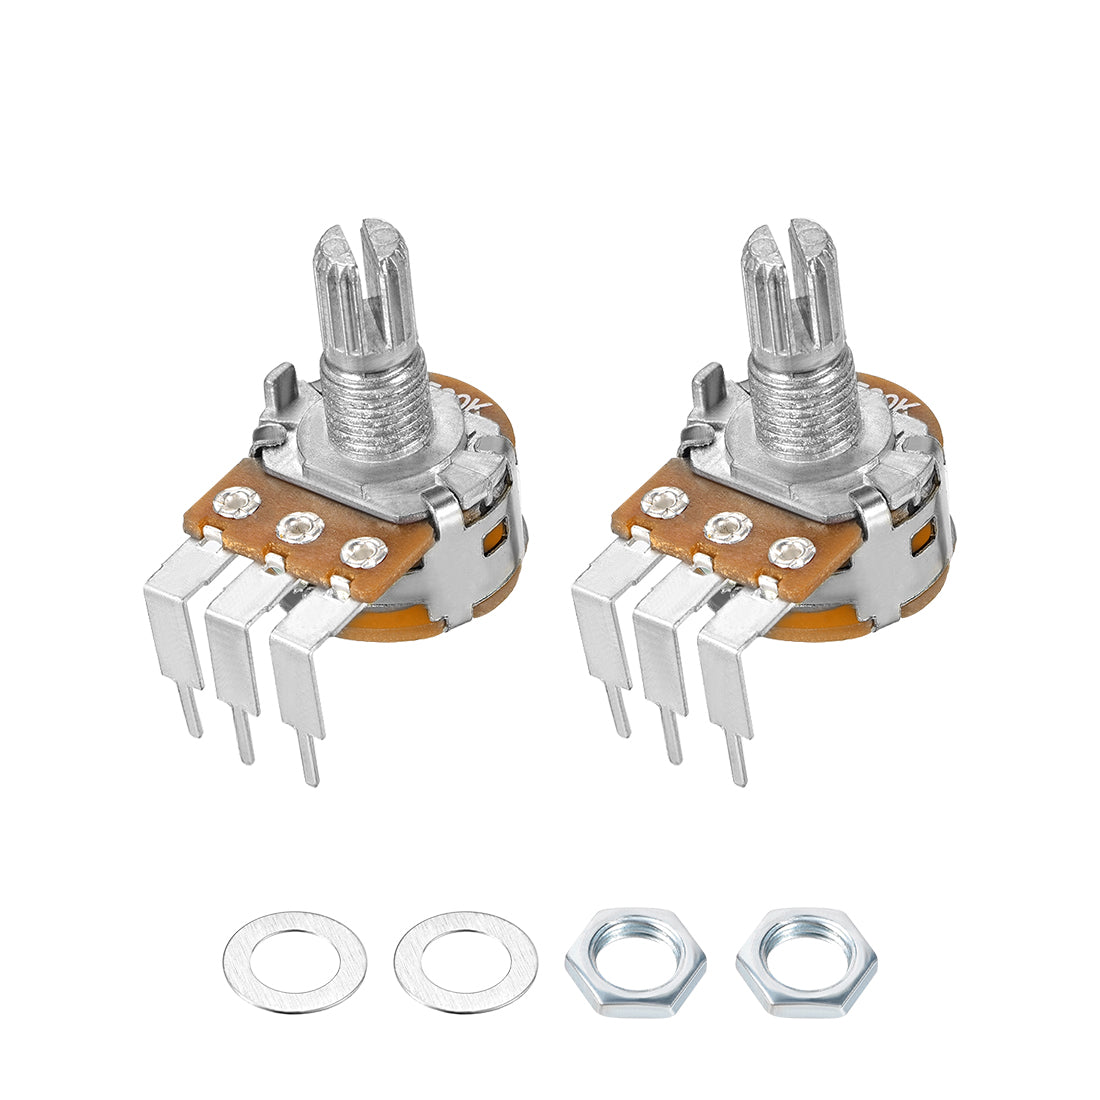 uxcell Uxcell WH148 Potentiometer with Switch 10K Ohm Variable Resistors Single Turn Rotary Carbon Film Taper 2pcs